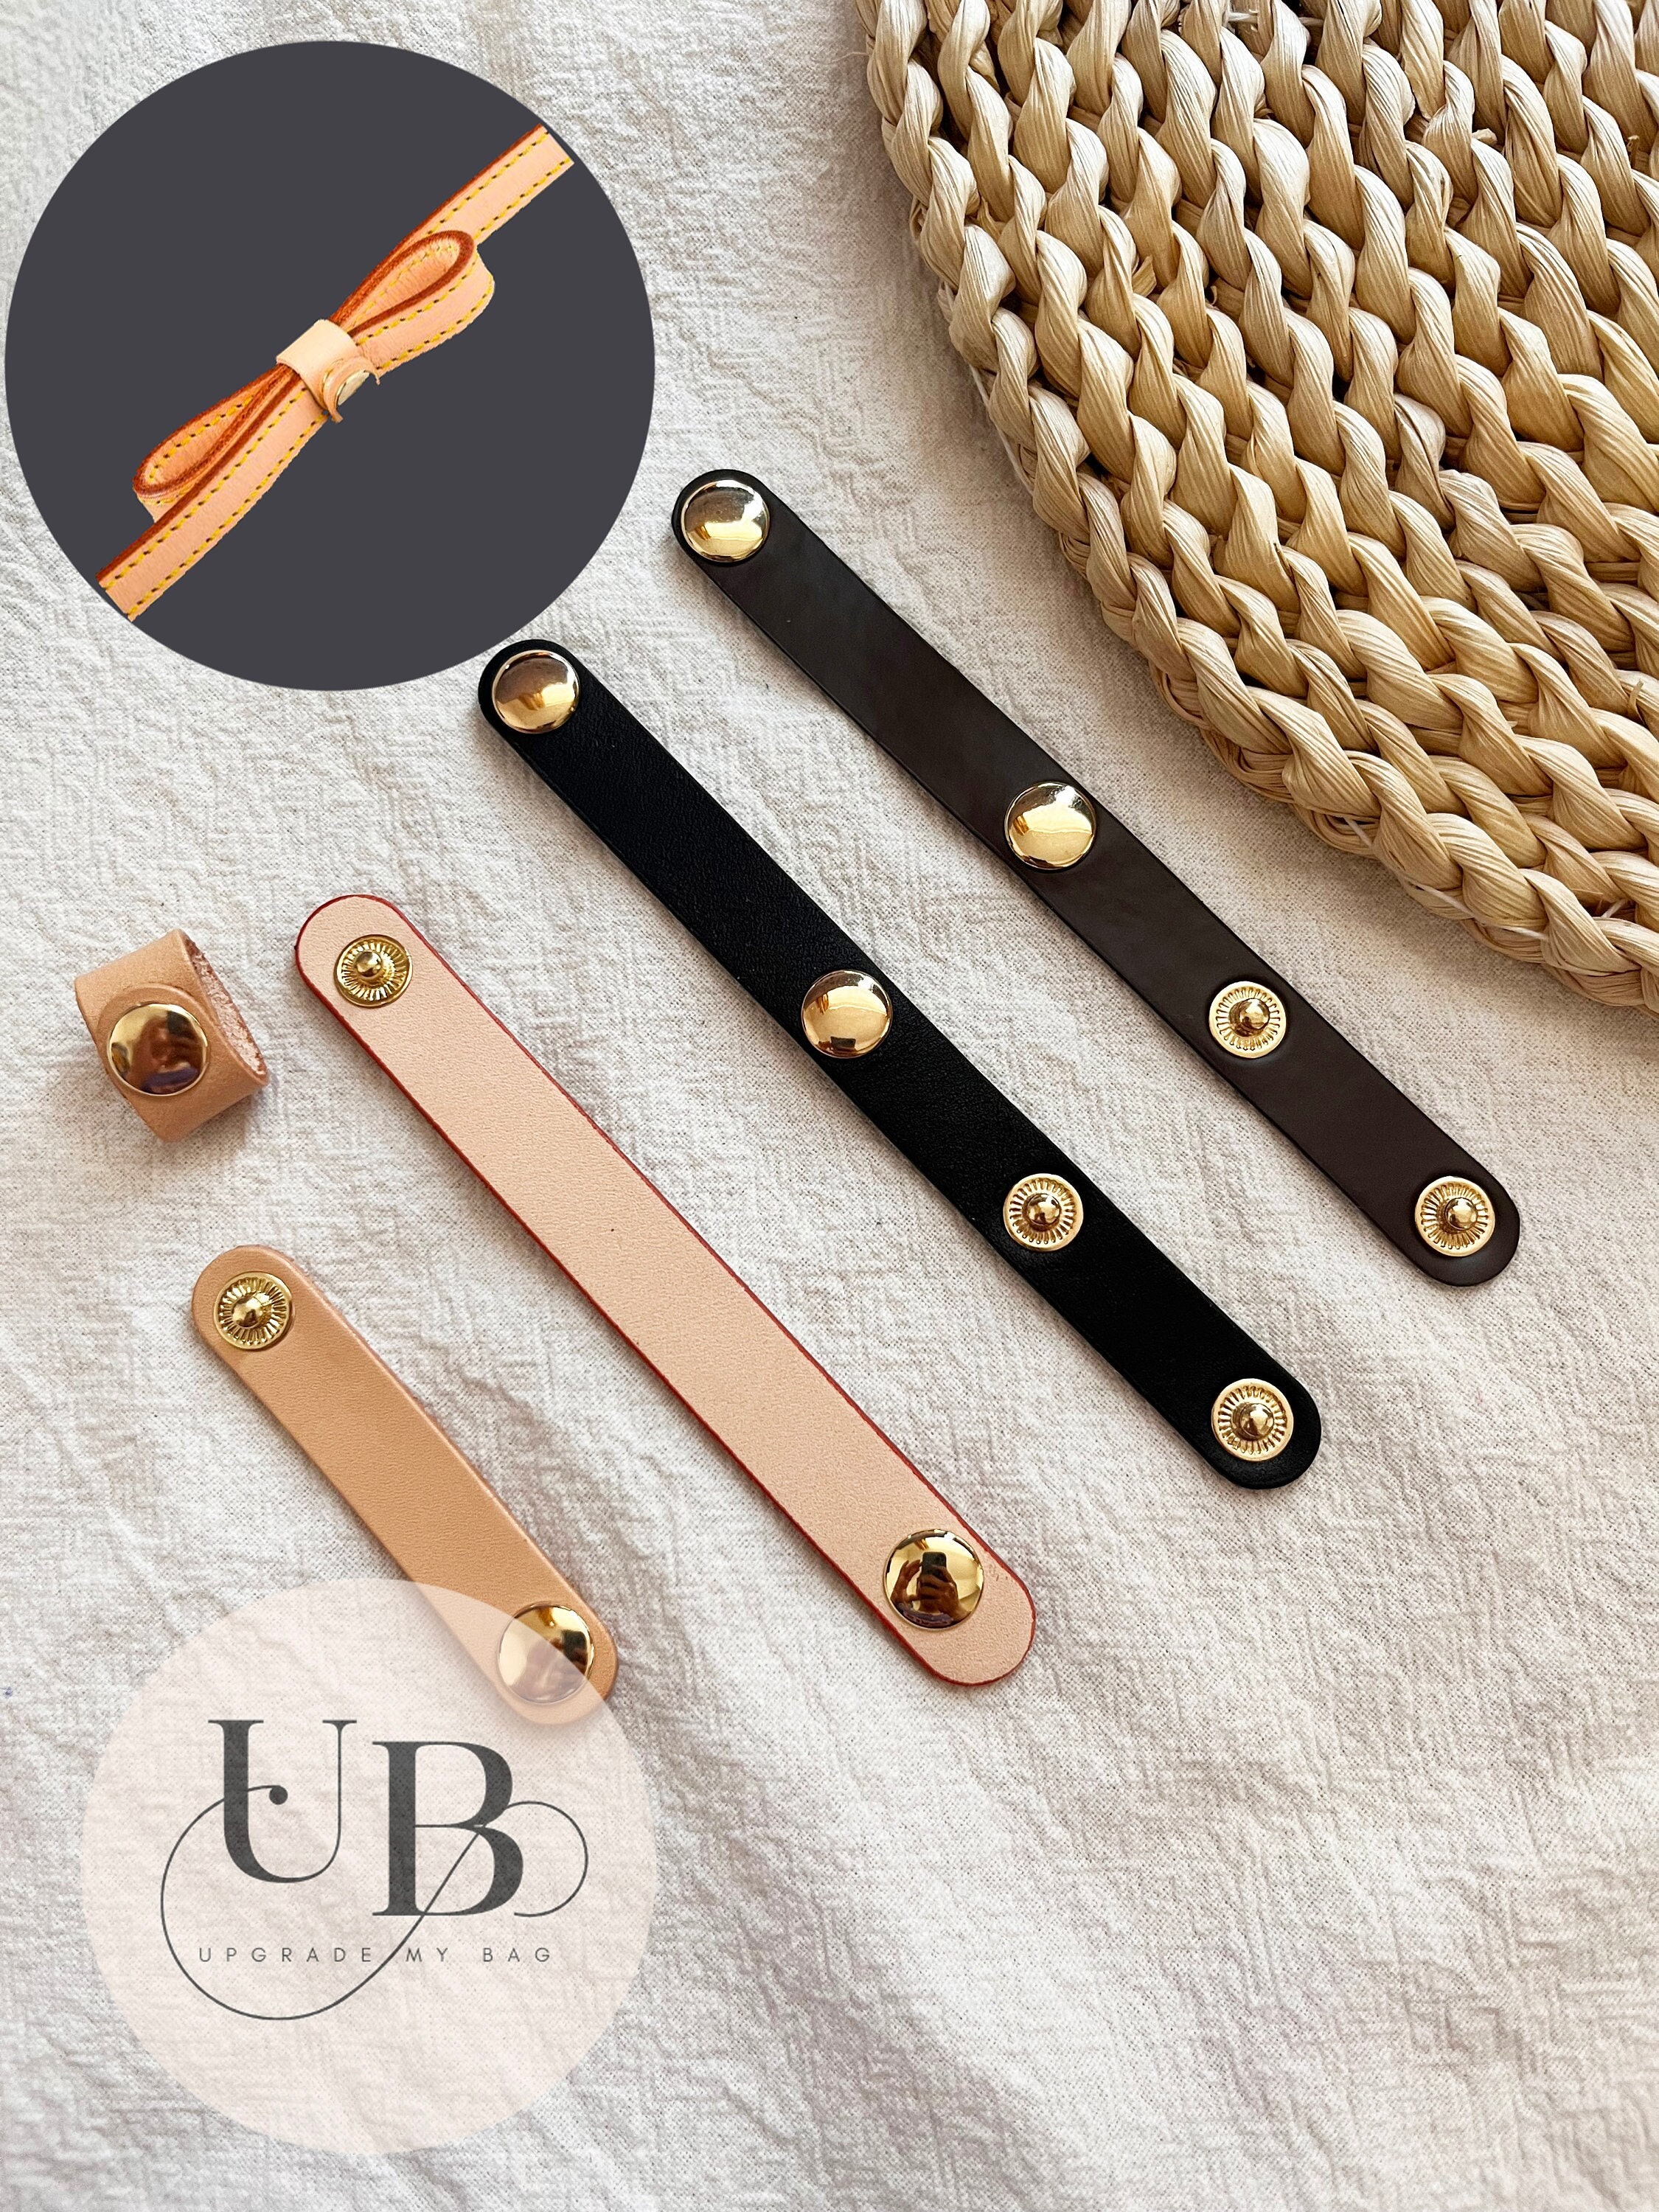 Purse Strap Hardware, 4 Colours, 3 Sizes, 3 Piece Set With Swivel Snap  Clasp, D-ring and Adjustment Slider, Shipped From Canada 